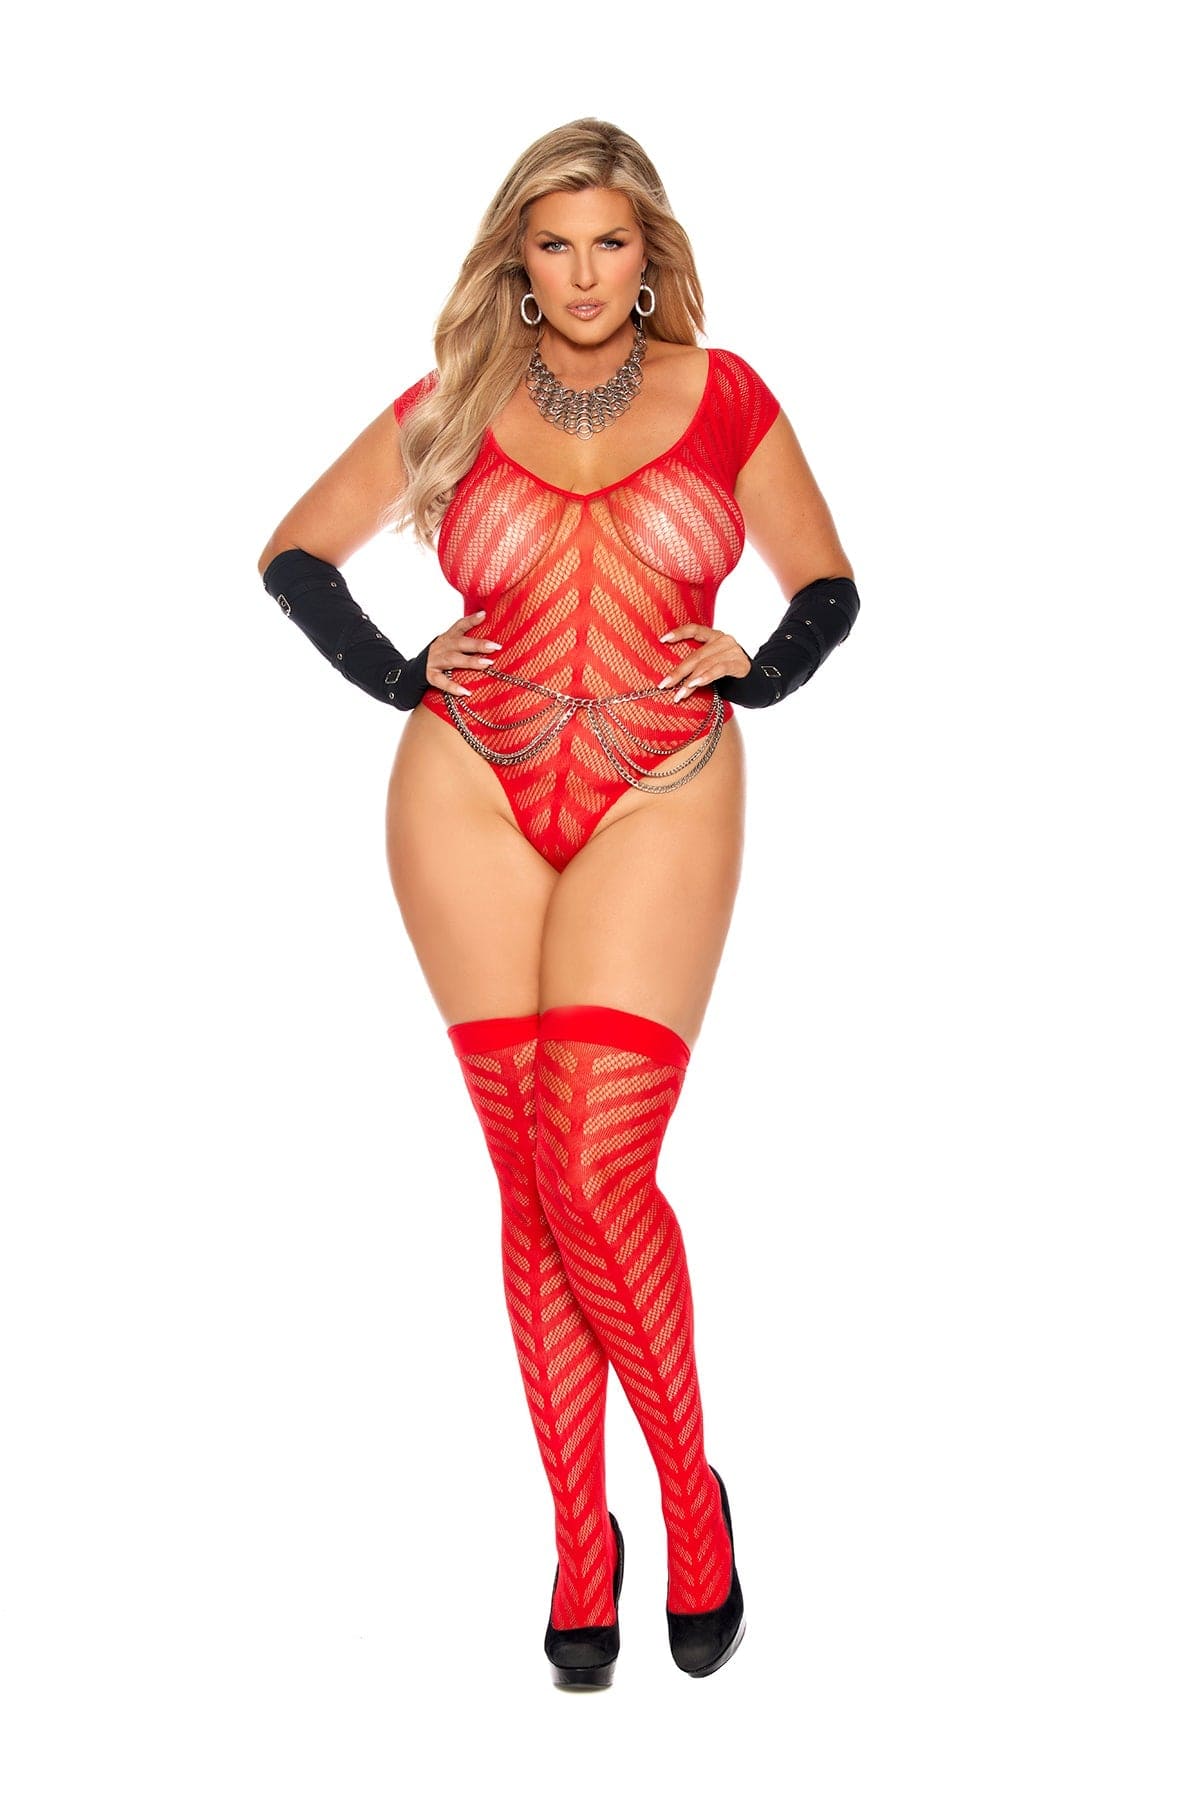 Plus Size Red Chevron Crochet Deep V Teddy and Matching StockingsMusotica.com